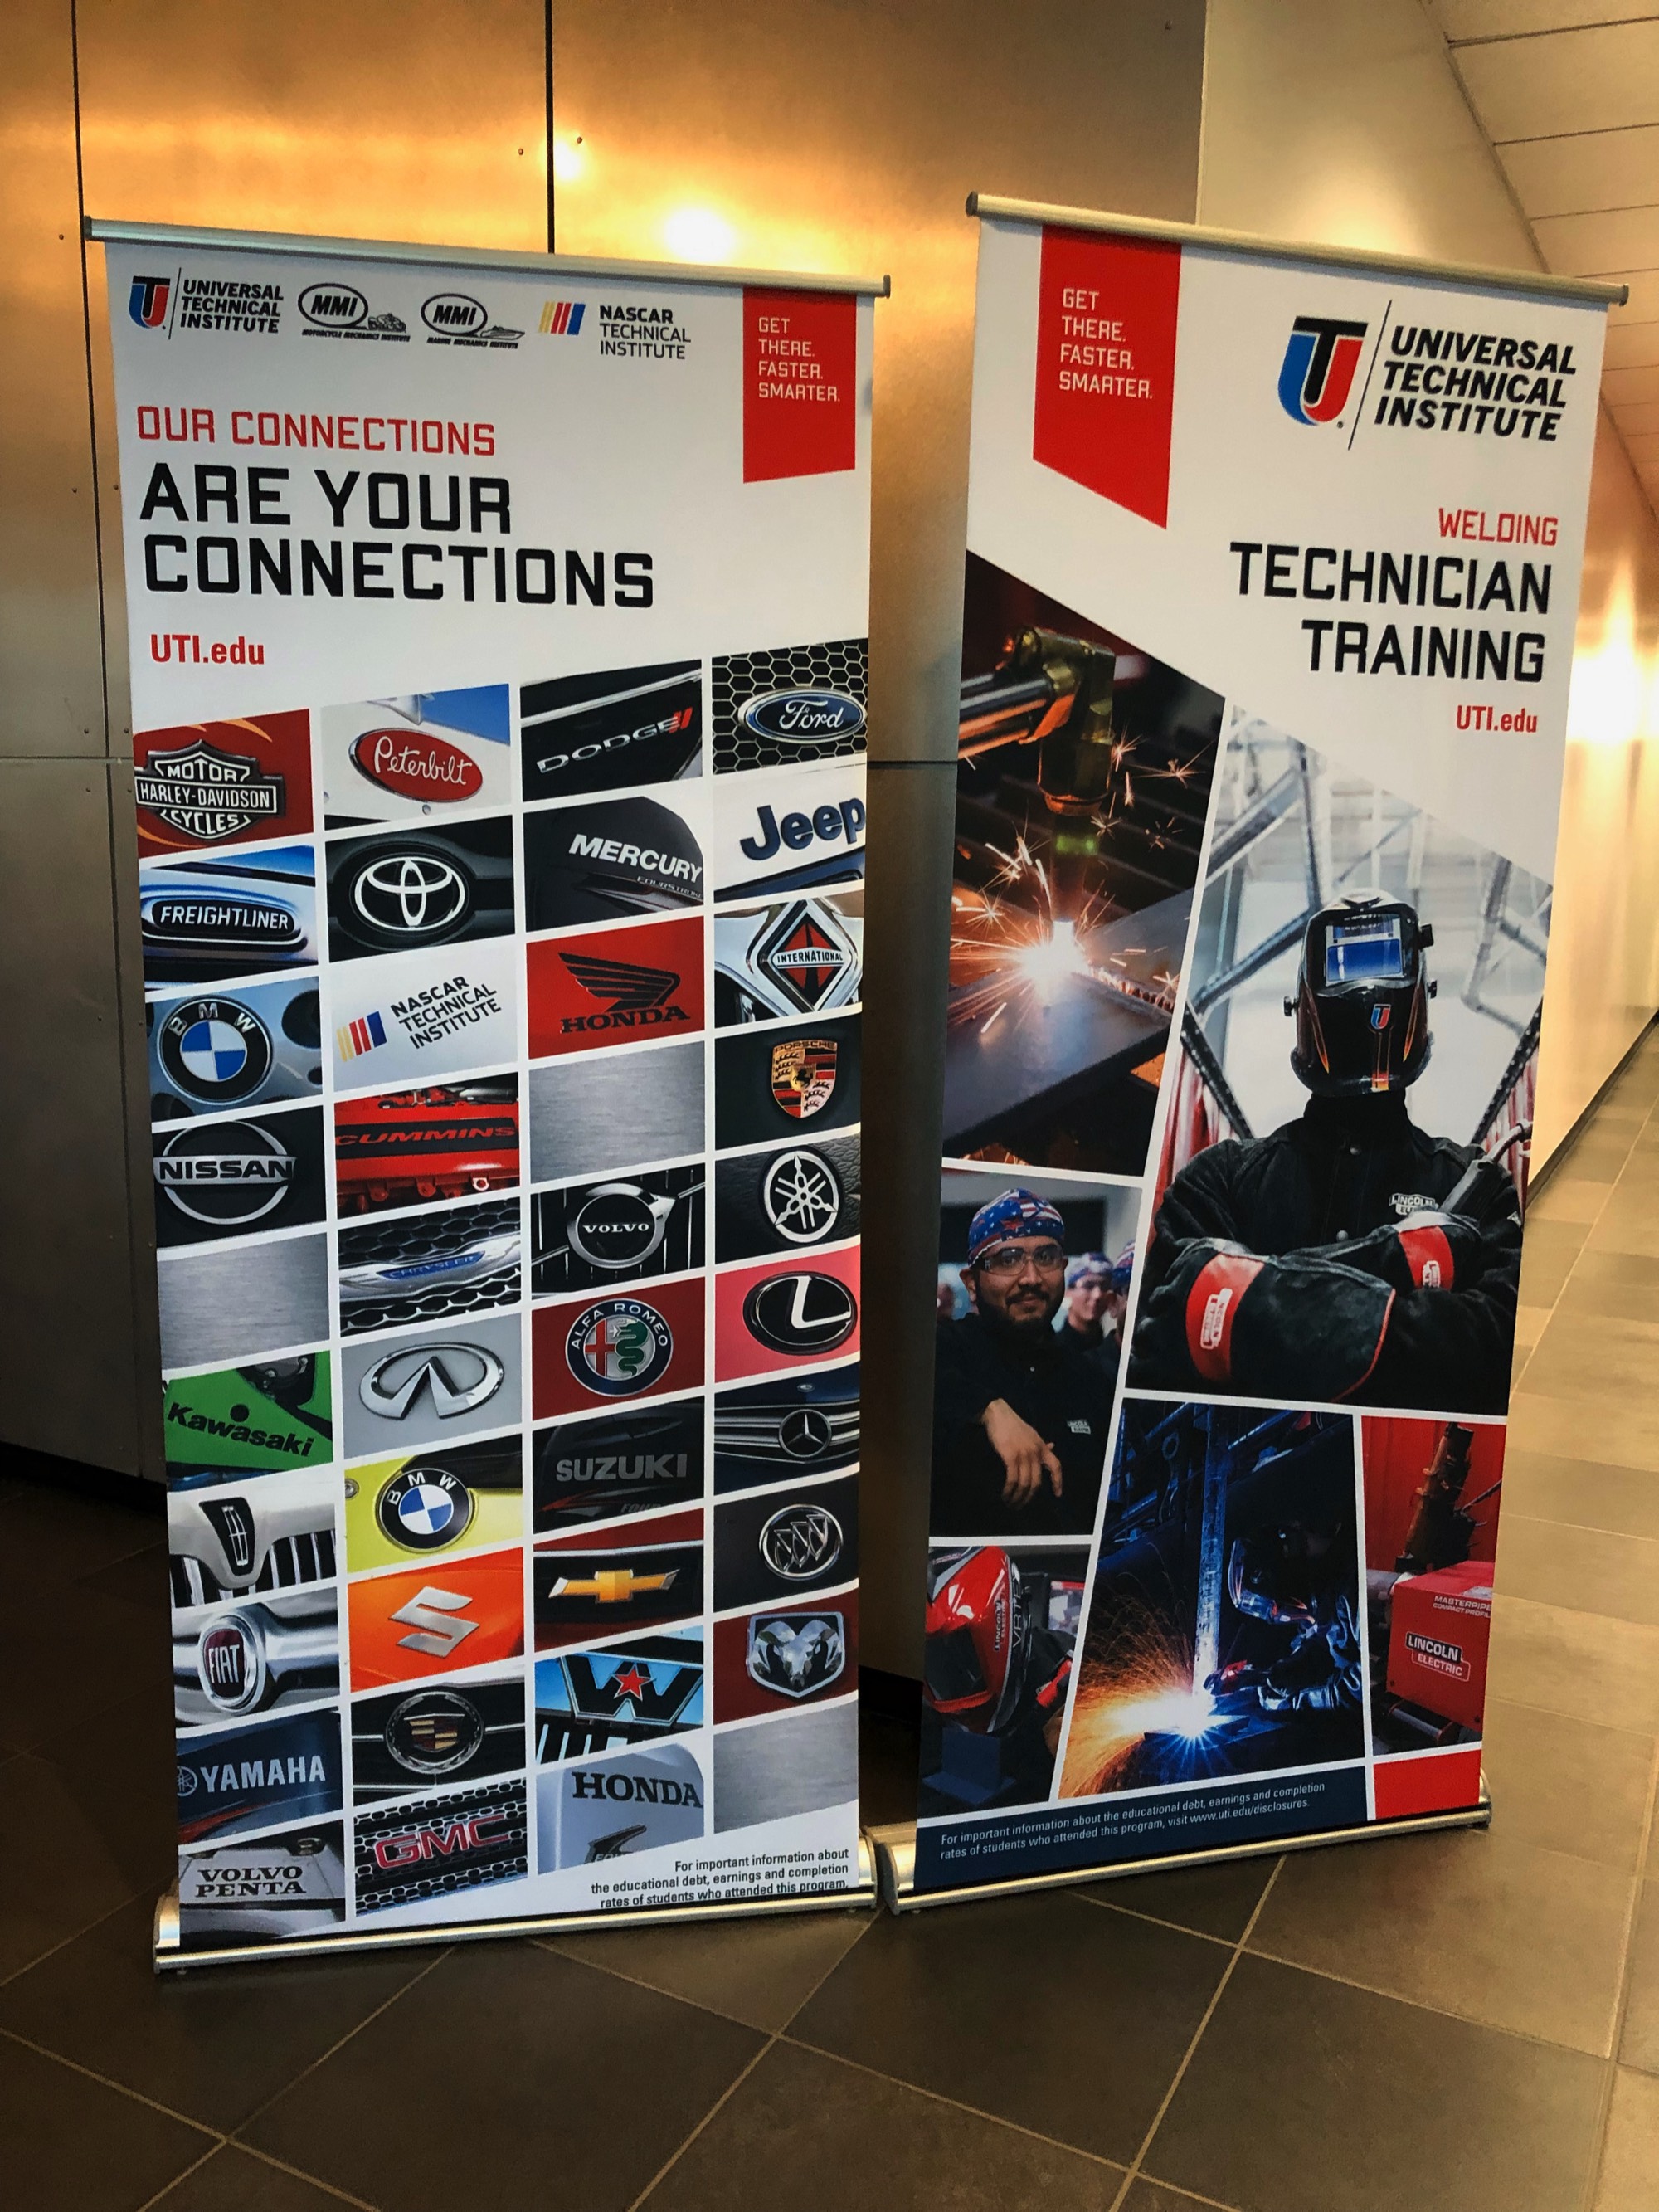 UTI Banners - Connections and Tech Training